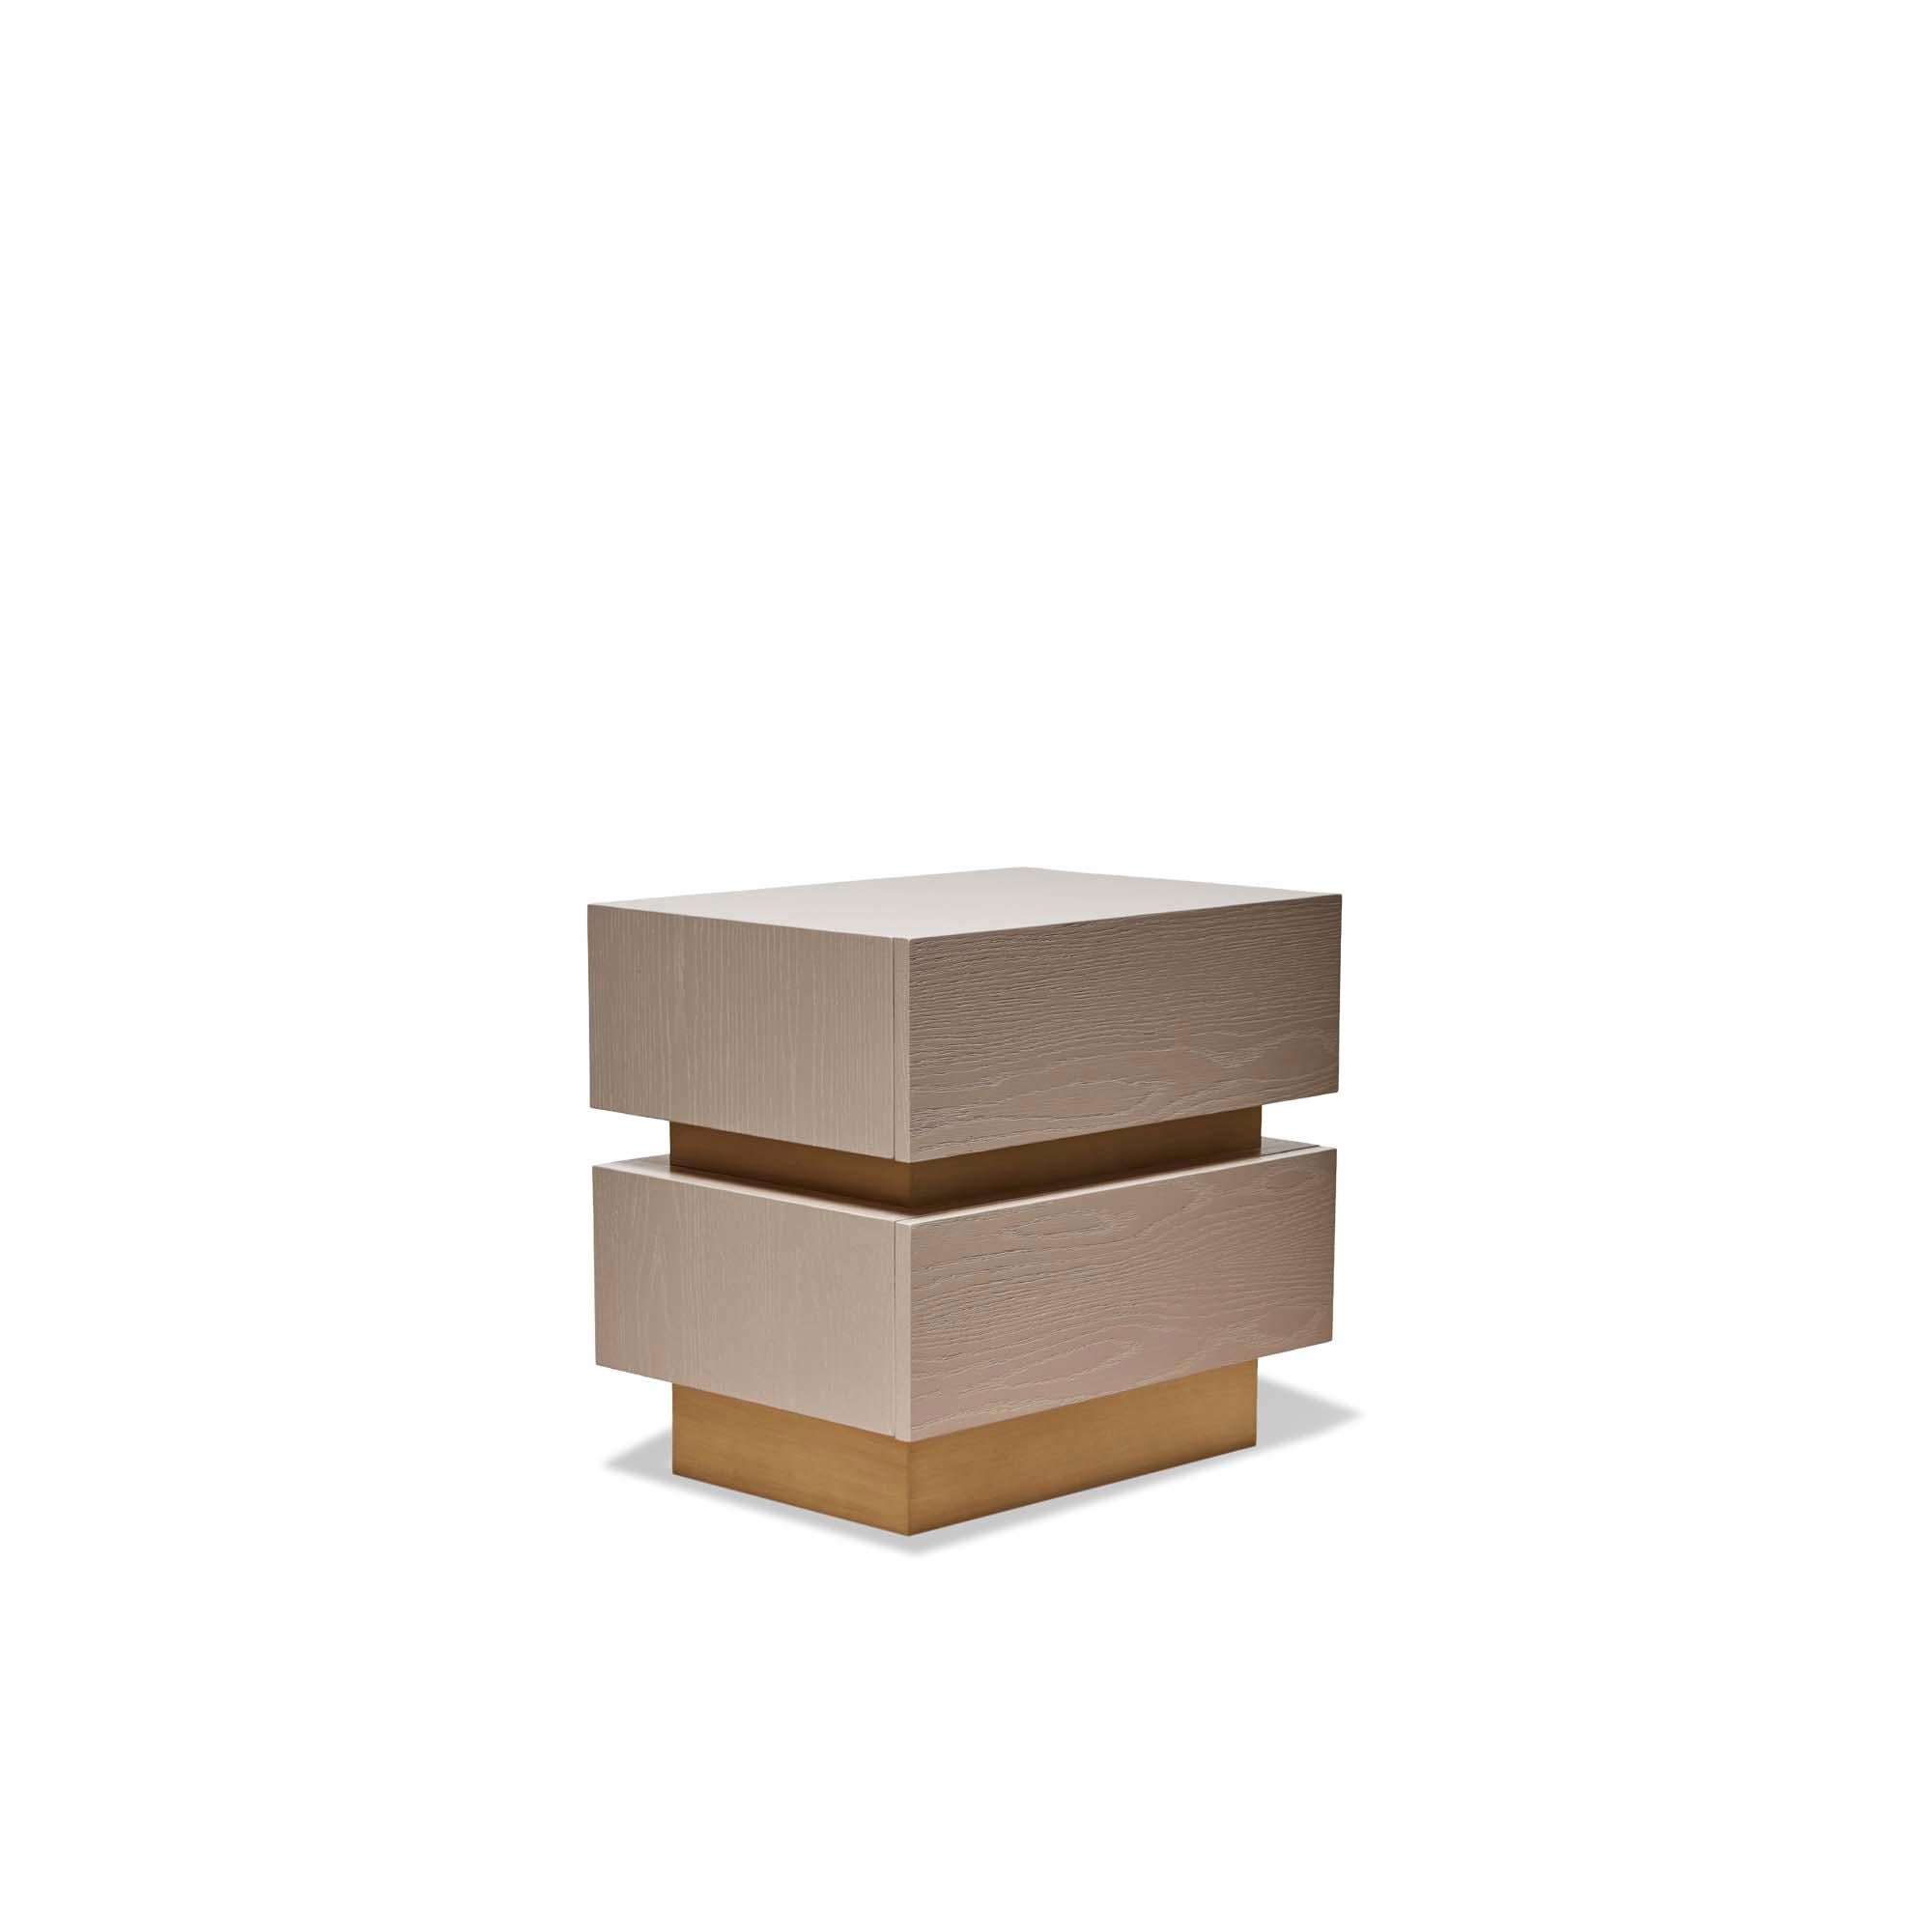 The stacked box nightstand with metal inset is a bedside table with two drawers that is available in either American walnut, or white oak and features a metal inset detail between the drawers. Available in two sizes. Show here in rocky beach